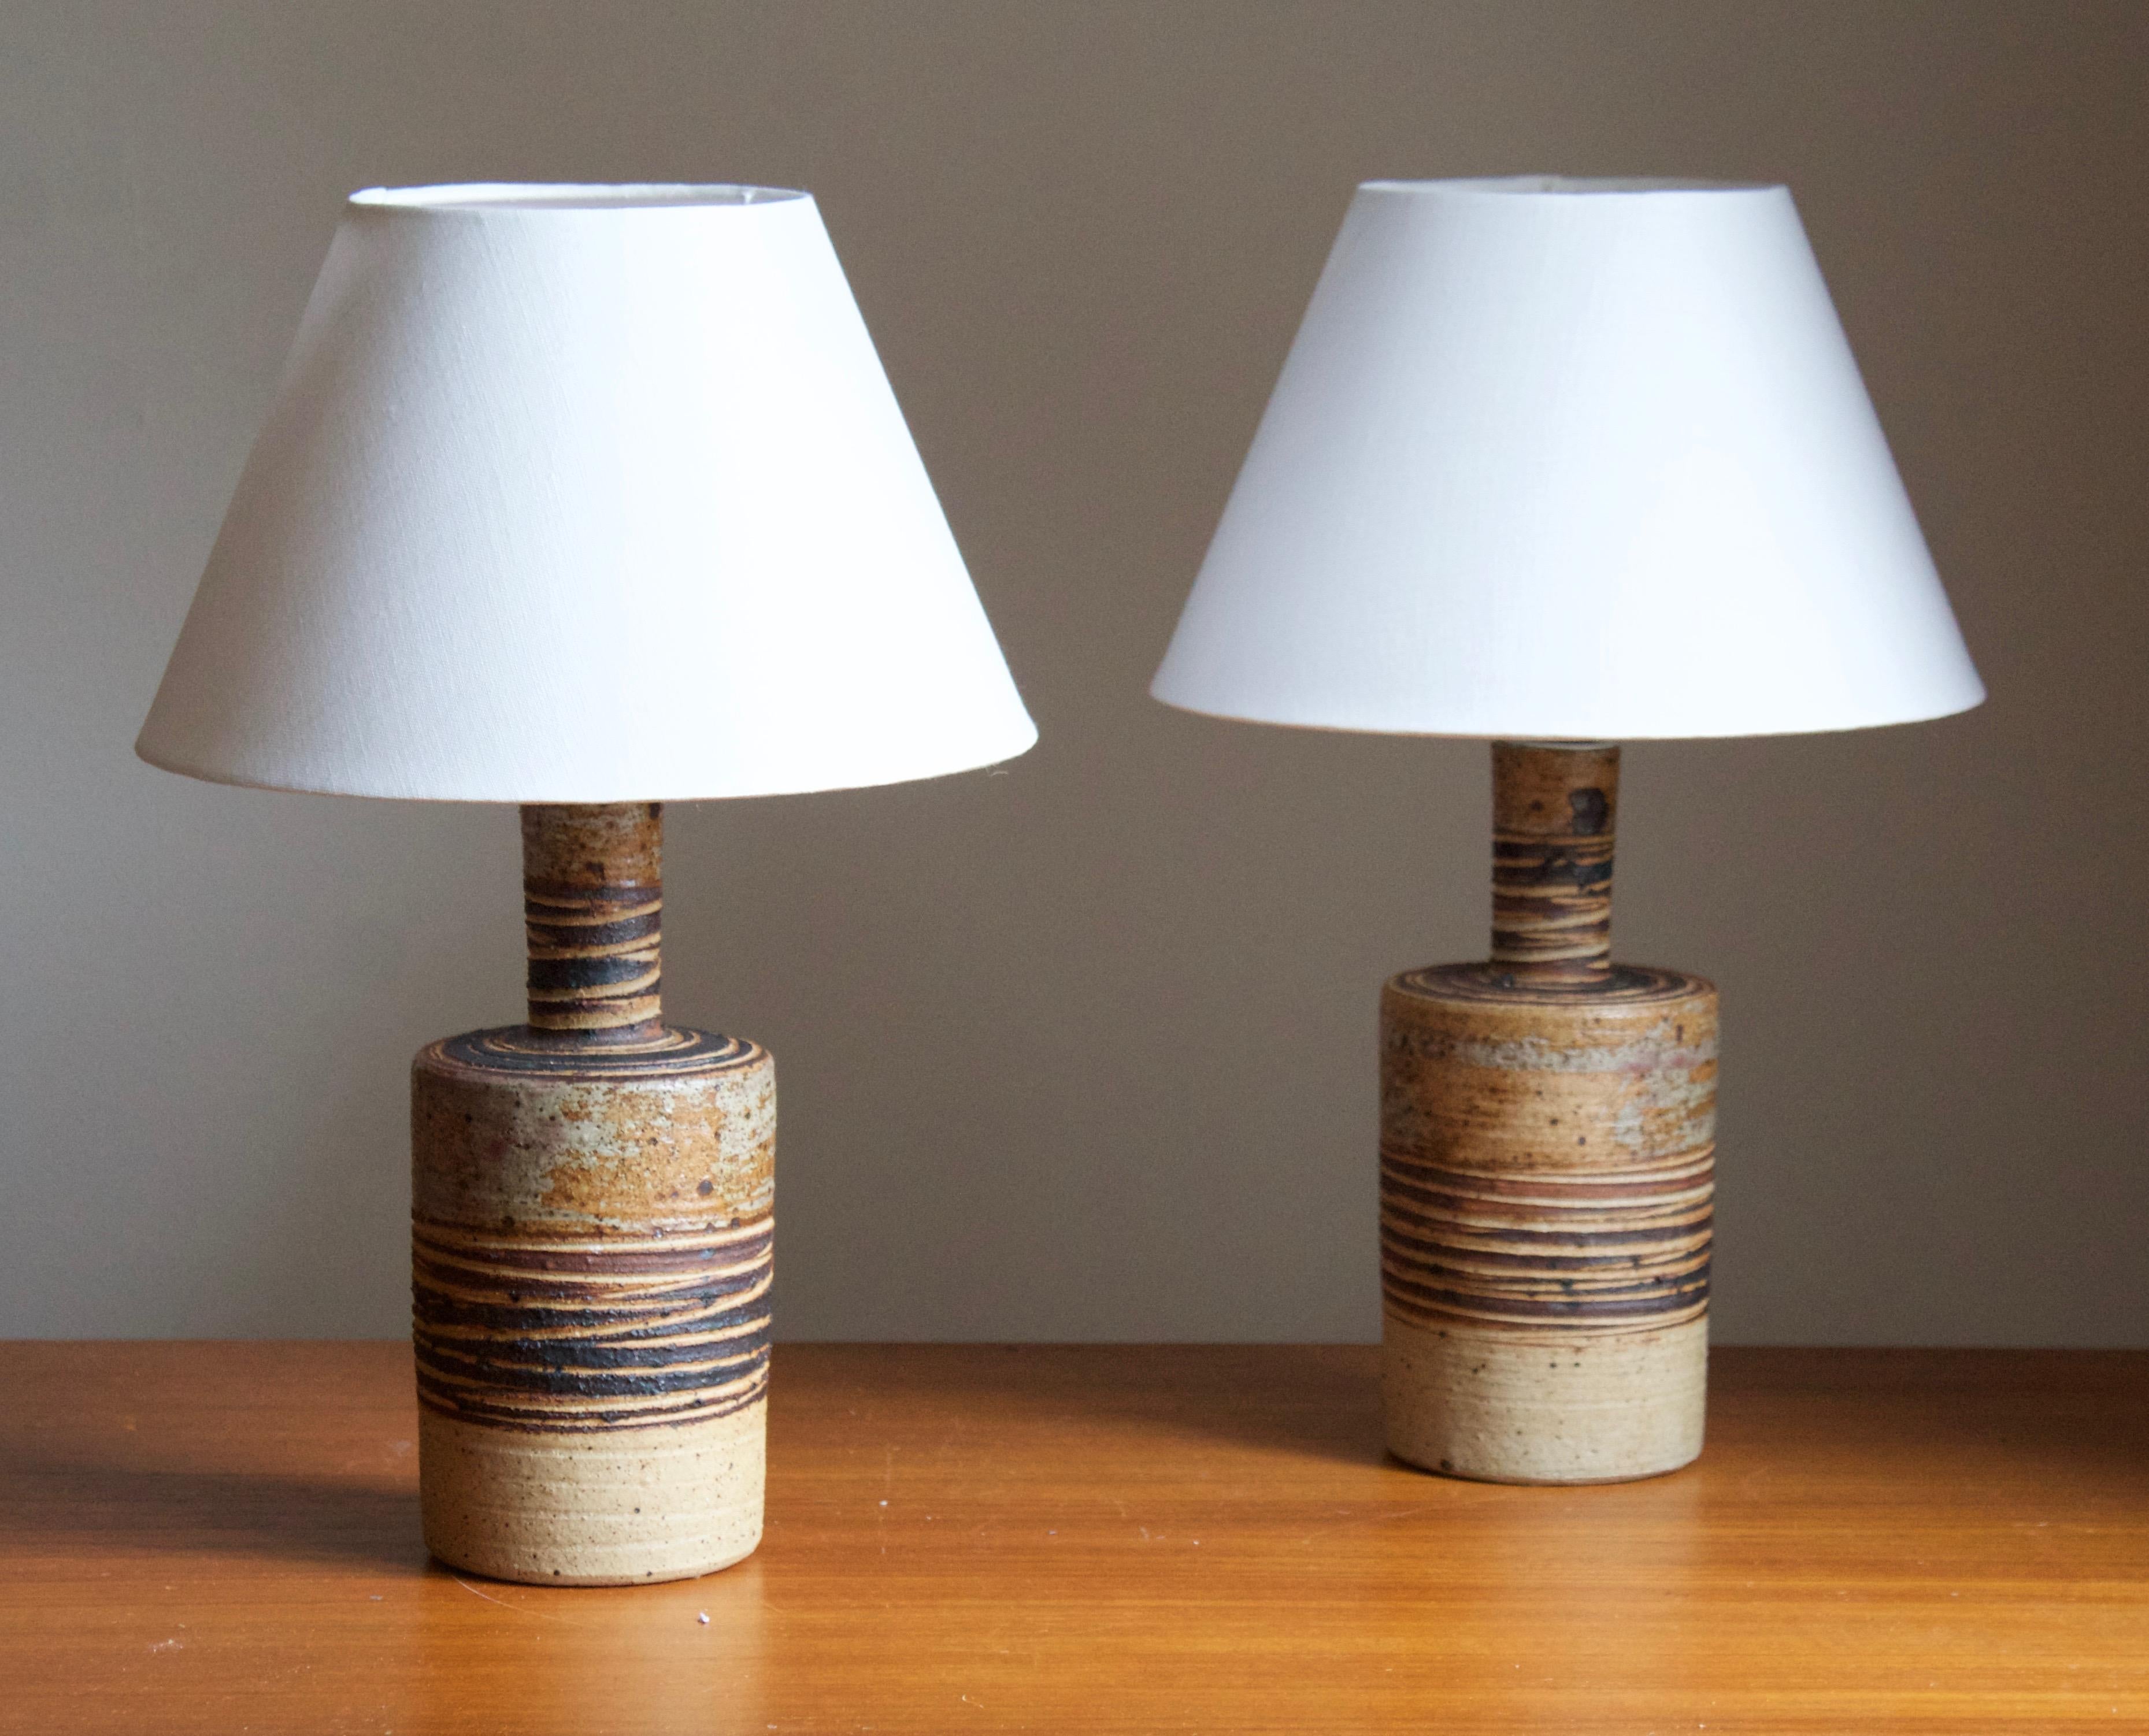 A pair of table lamps. Produced and designed by Tue Poulsen, Denmark, 1960s. Underside of base signed.

Sold without lampshades. Stated dimensions exclude lampshade. Height includes sockets.

Glaze features a brown color.

Other designers of the